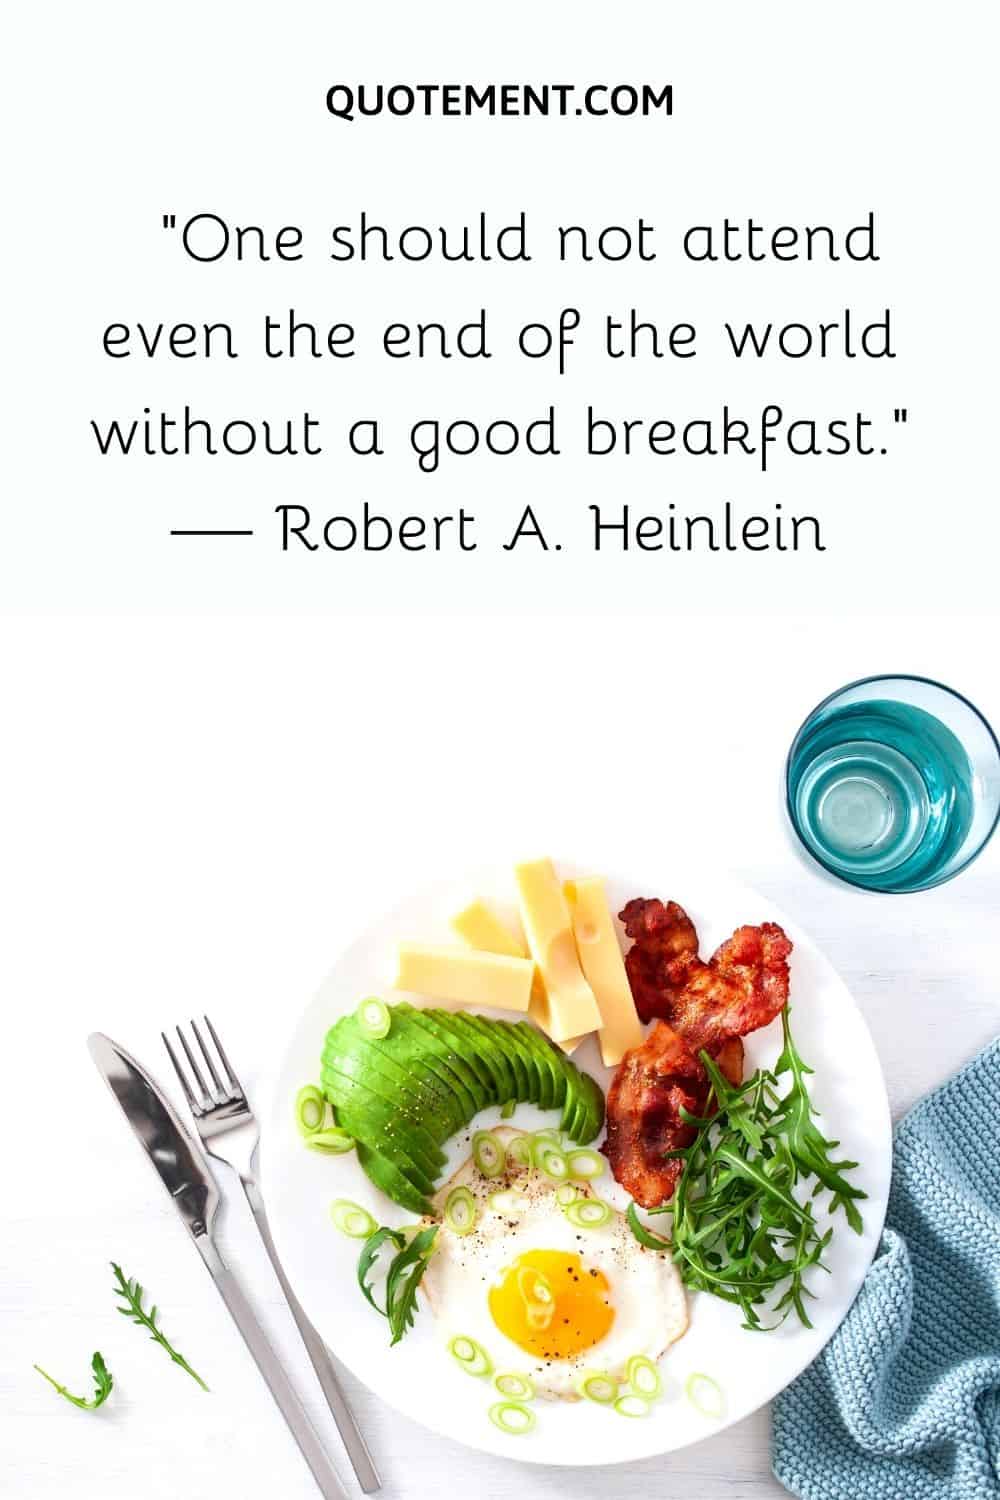 “One should not attend even the end of the world without a good breakfast.” — Robert A. Heinlein